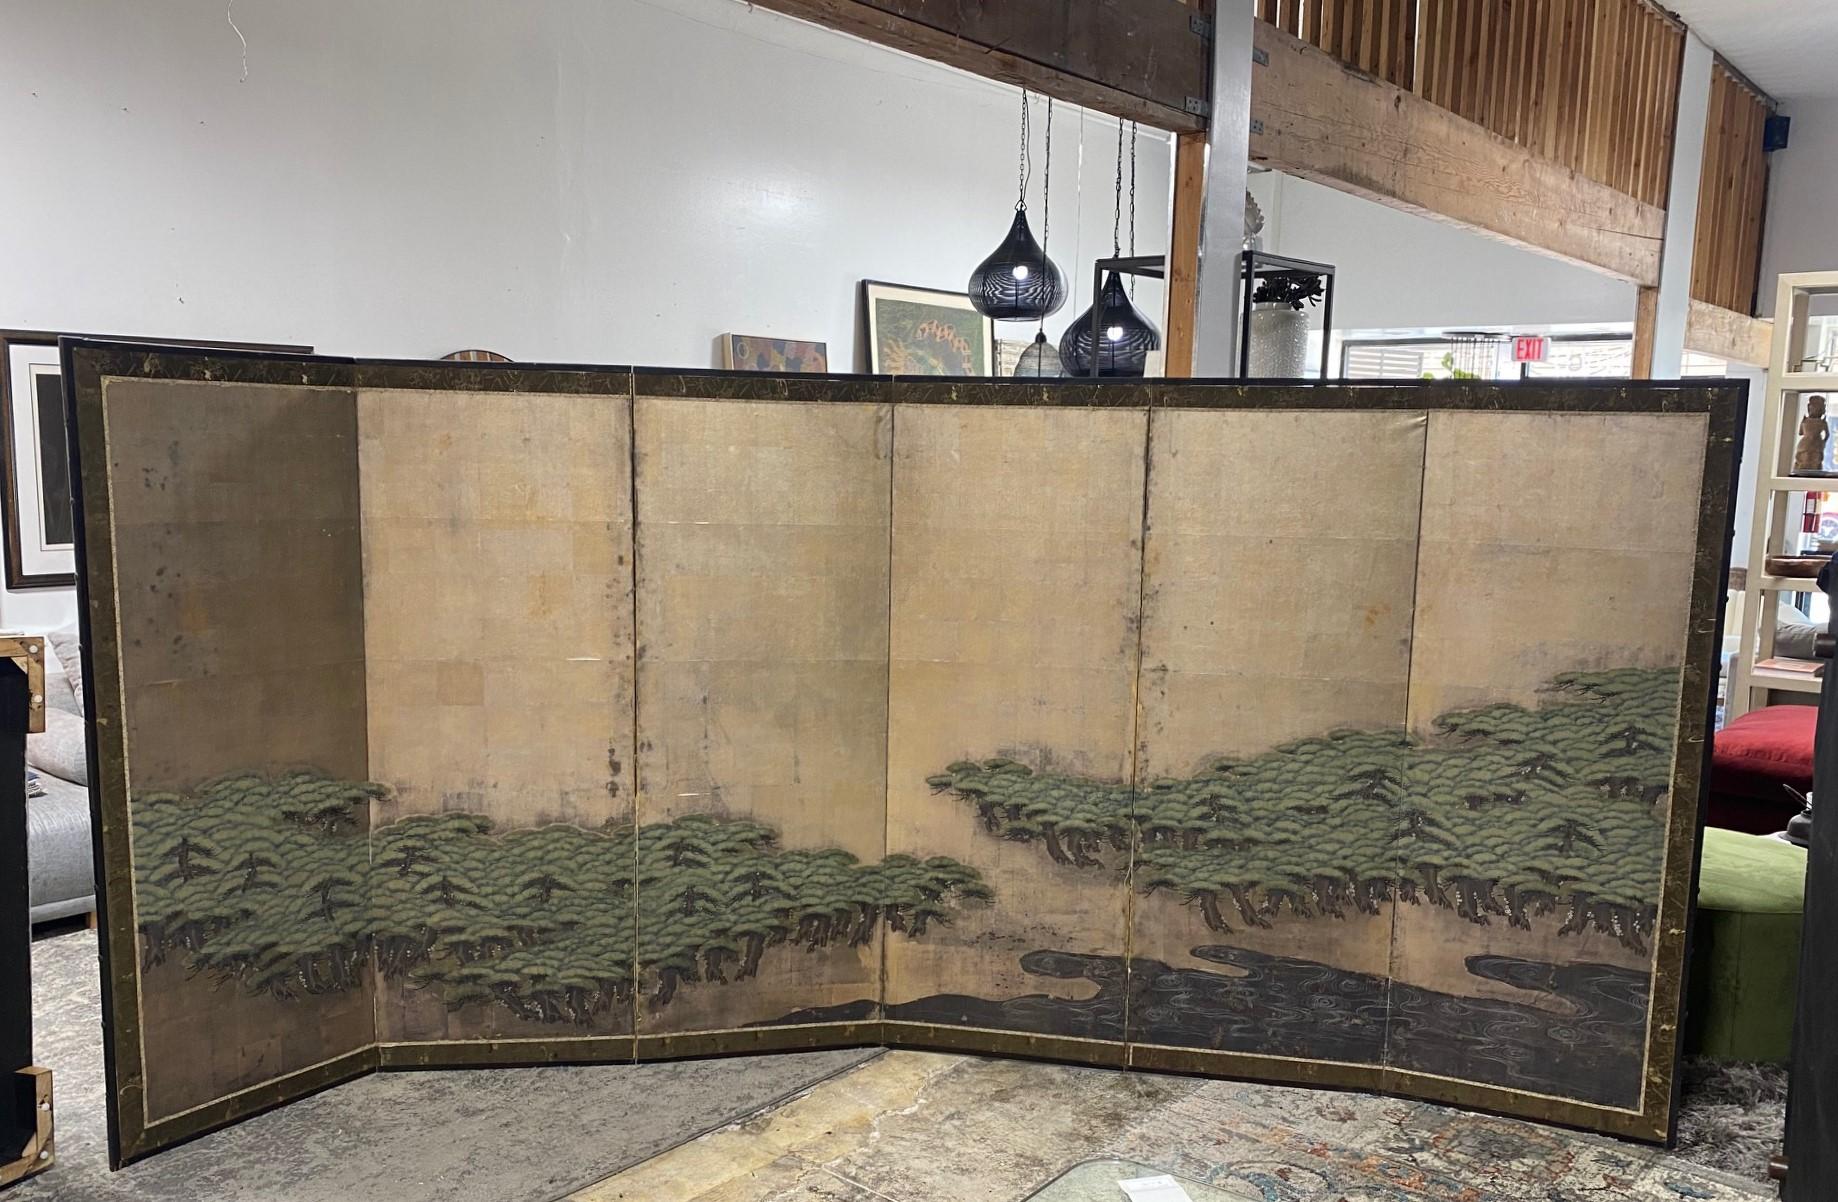 A beautiful, wonderfully composed (with fabulous use of negative space) quite large six-panel Sea of Trees Japanese Byobu folding screen/room divider depicting a vast forest scene with lush emerald green trees (perhaps pine trees) on a